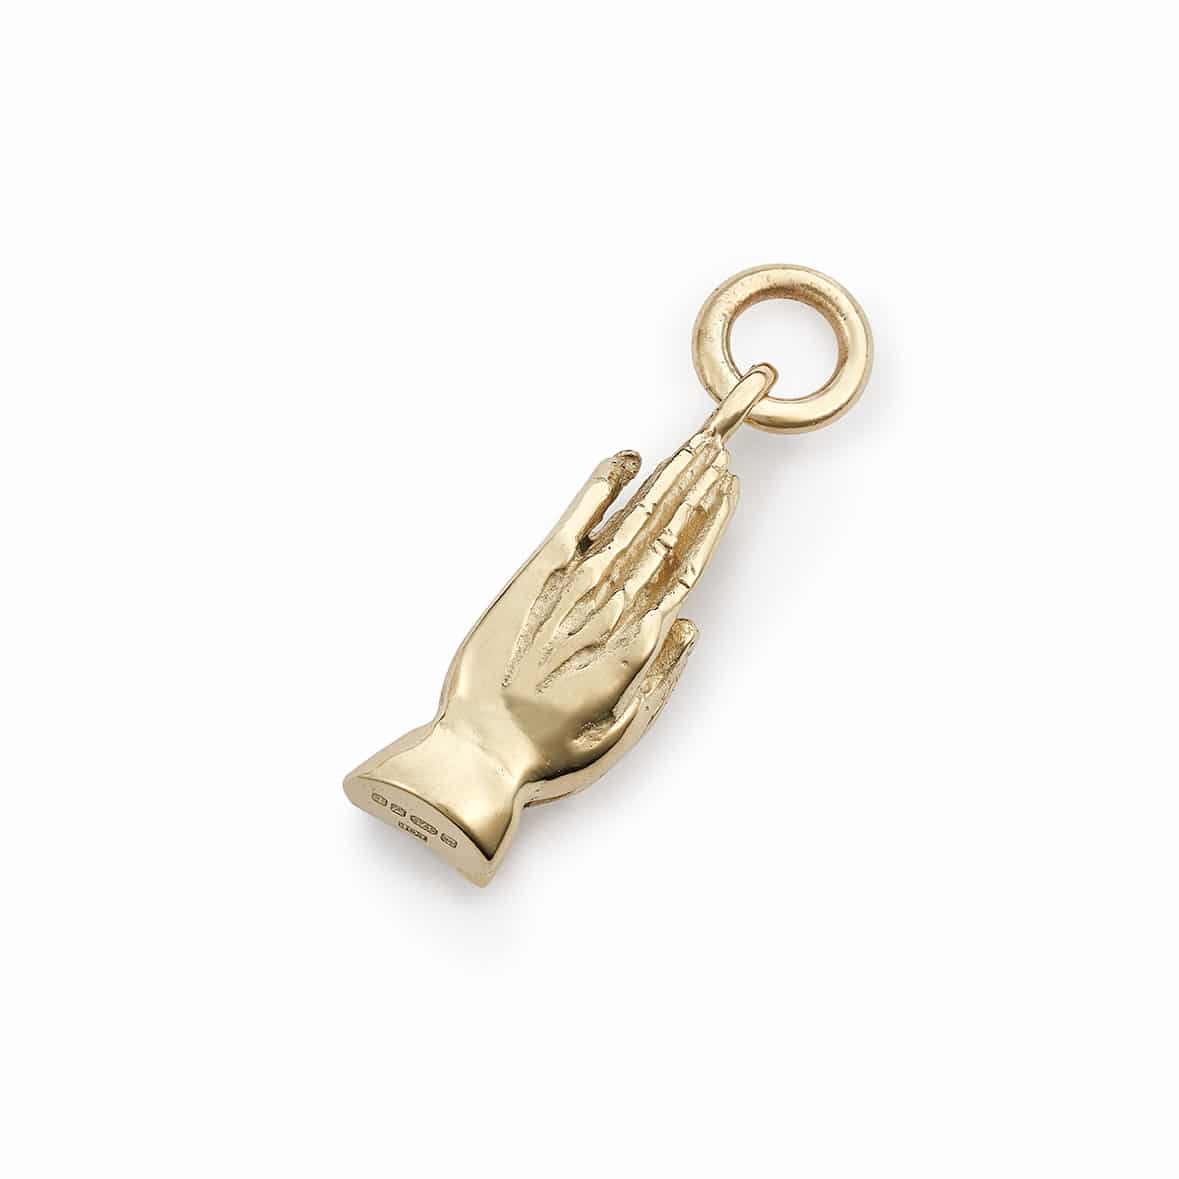 9ct Gold Praying Hands Pendant – The Great Frog